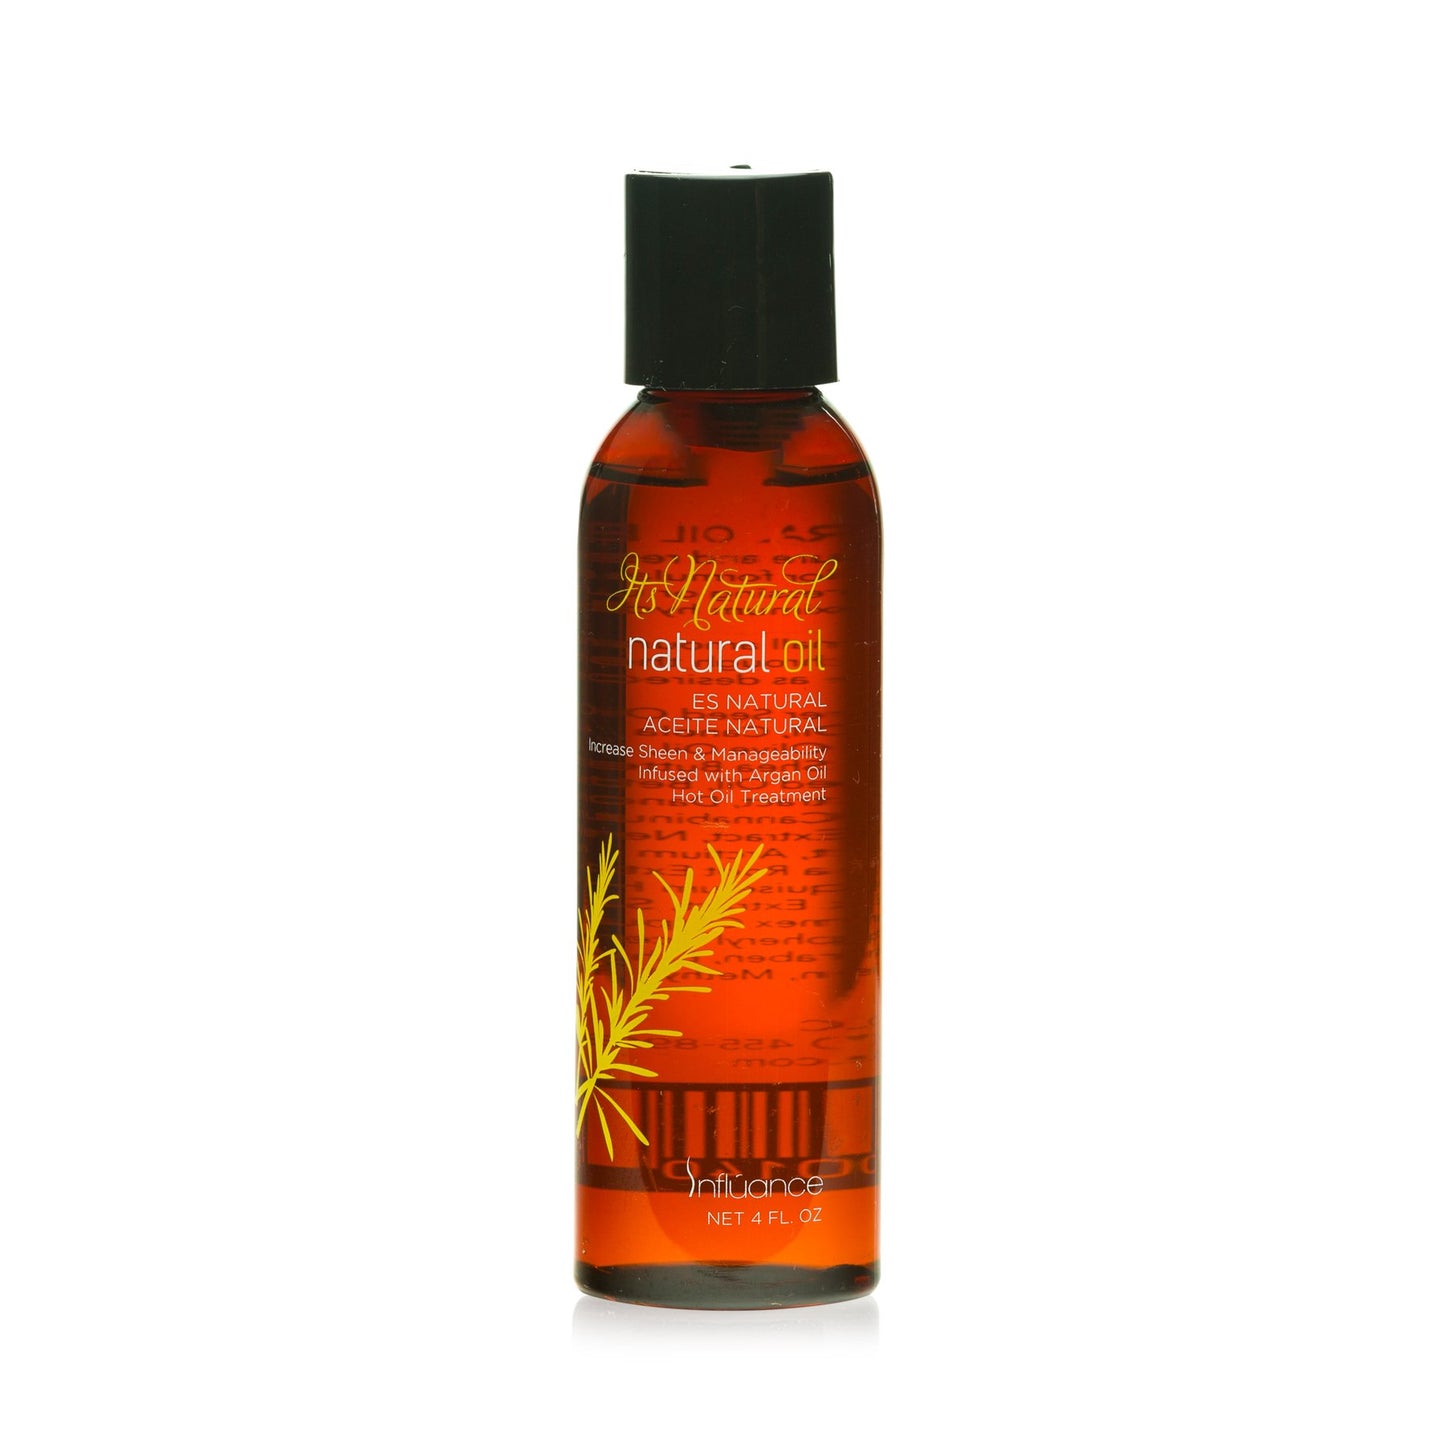 Influance It's Natural Natural Oil